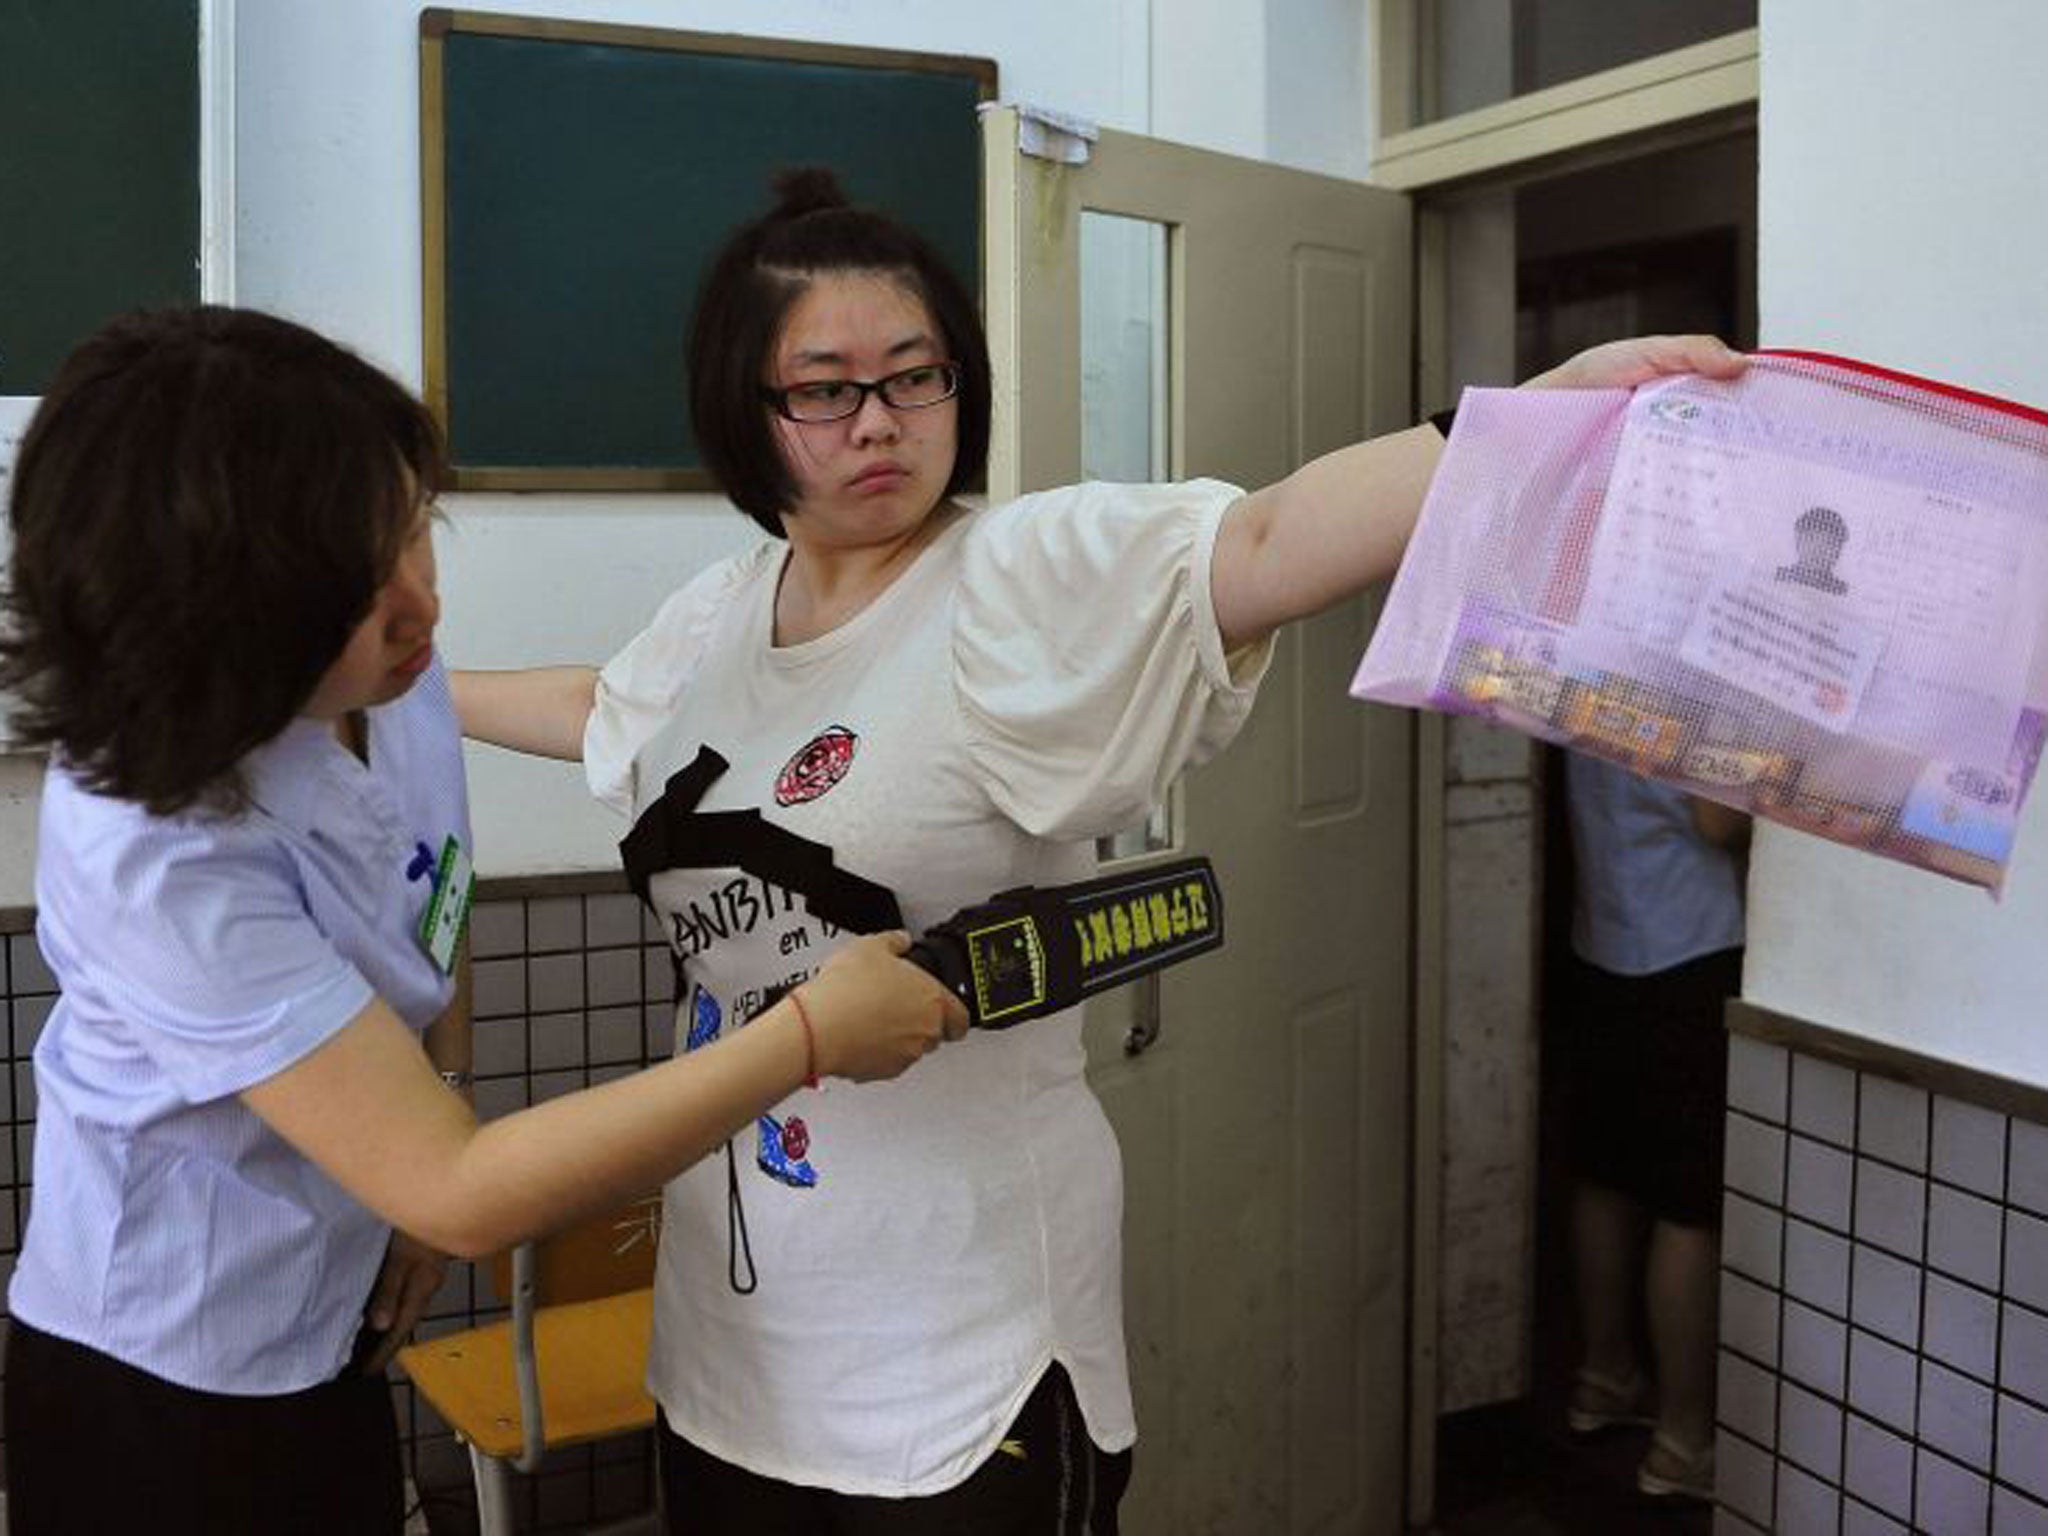 A student goes through a security check as she enters an exam room in Shenyang